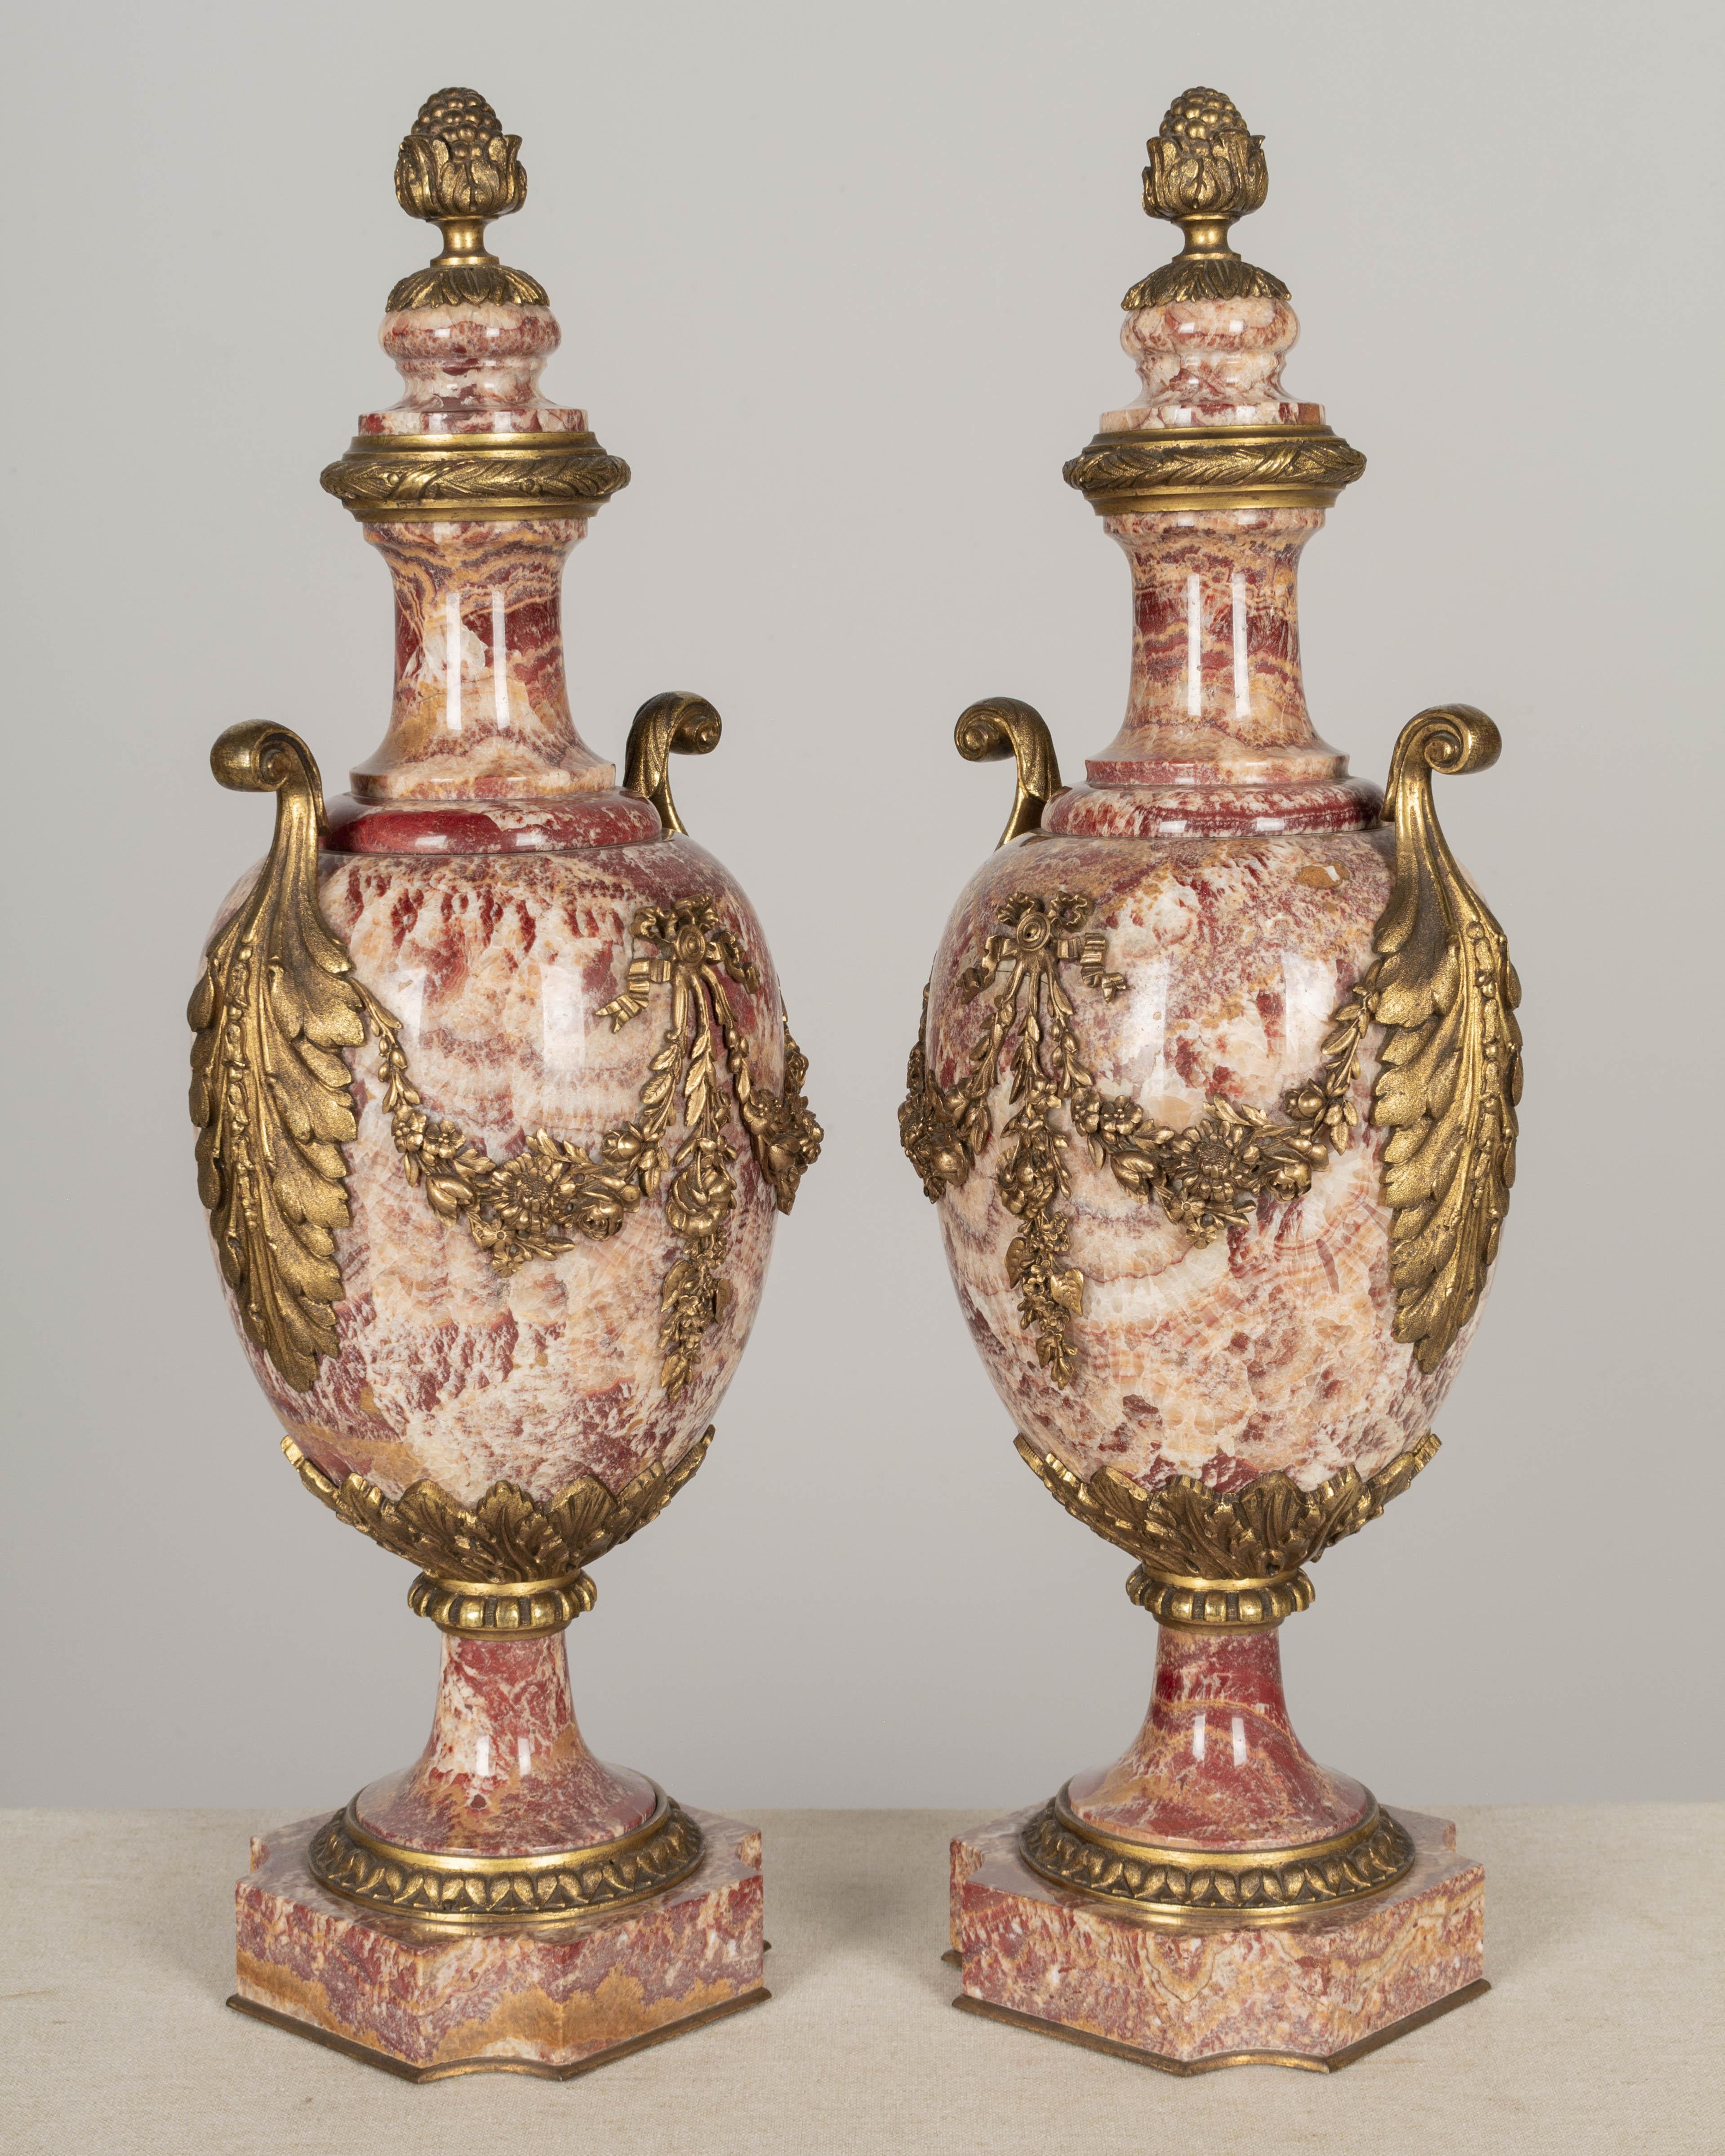 19th Century French Marble and Bronze Cassolette Urns Pair For Sale 3